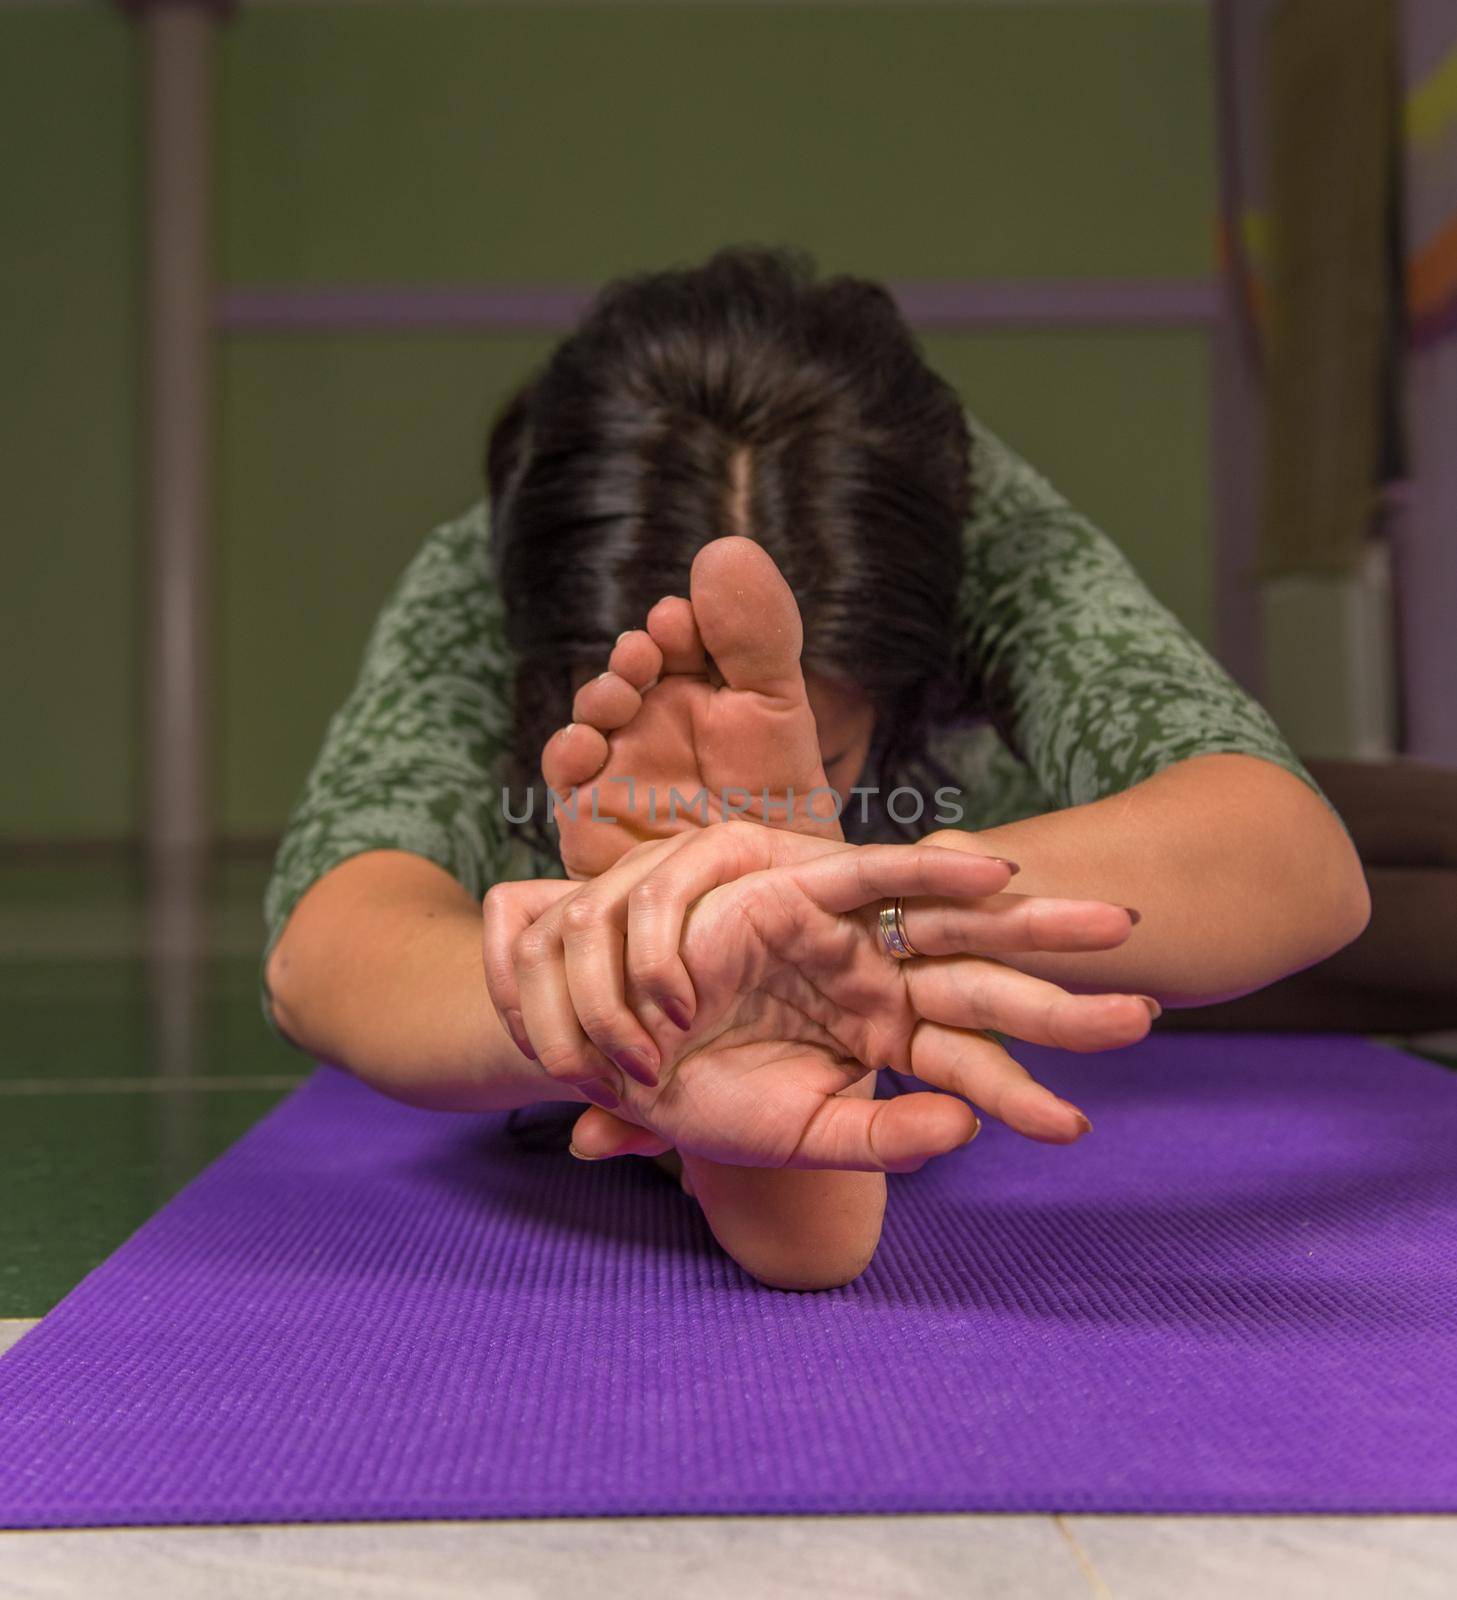 Yoga master doing yoga stretches ./Professional yoga trainer works out yoga stretches .